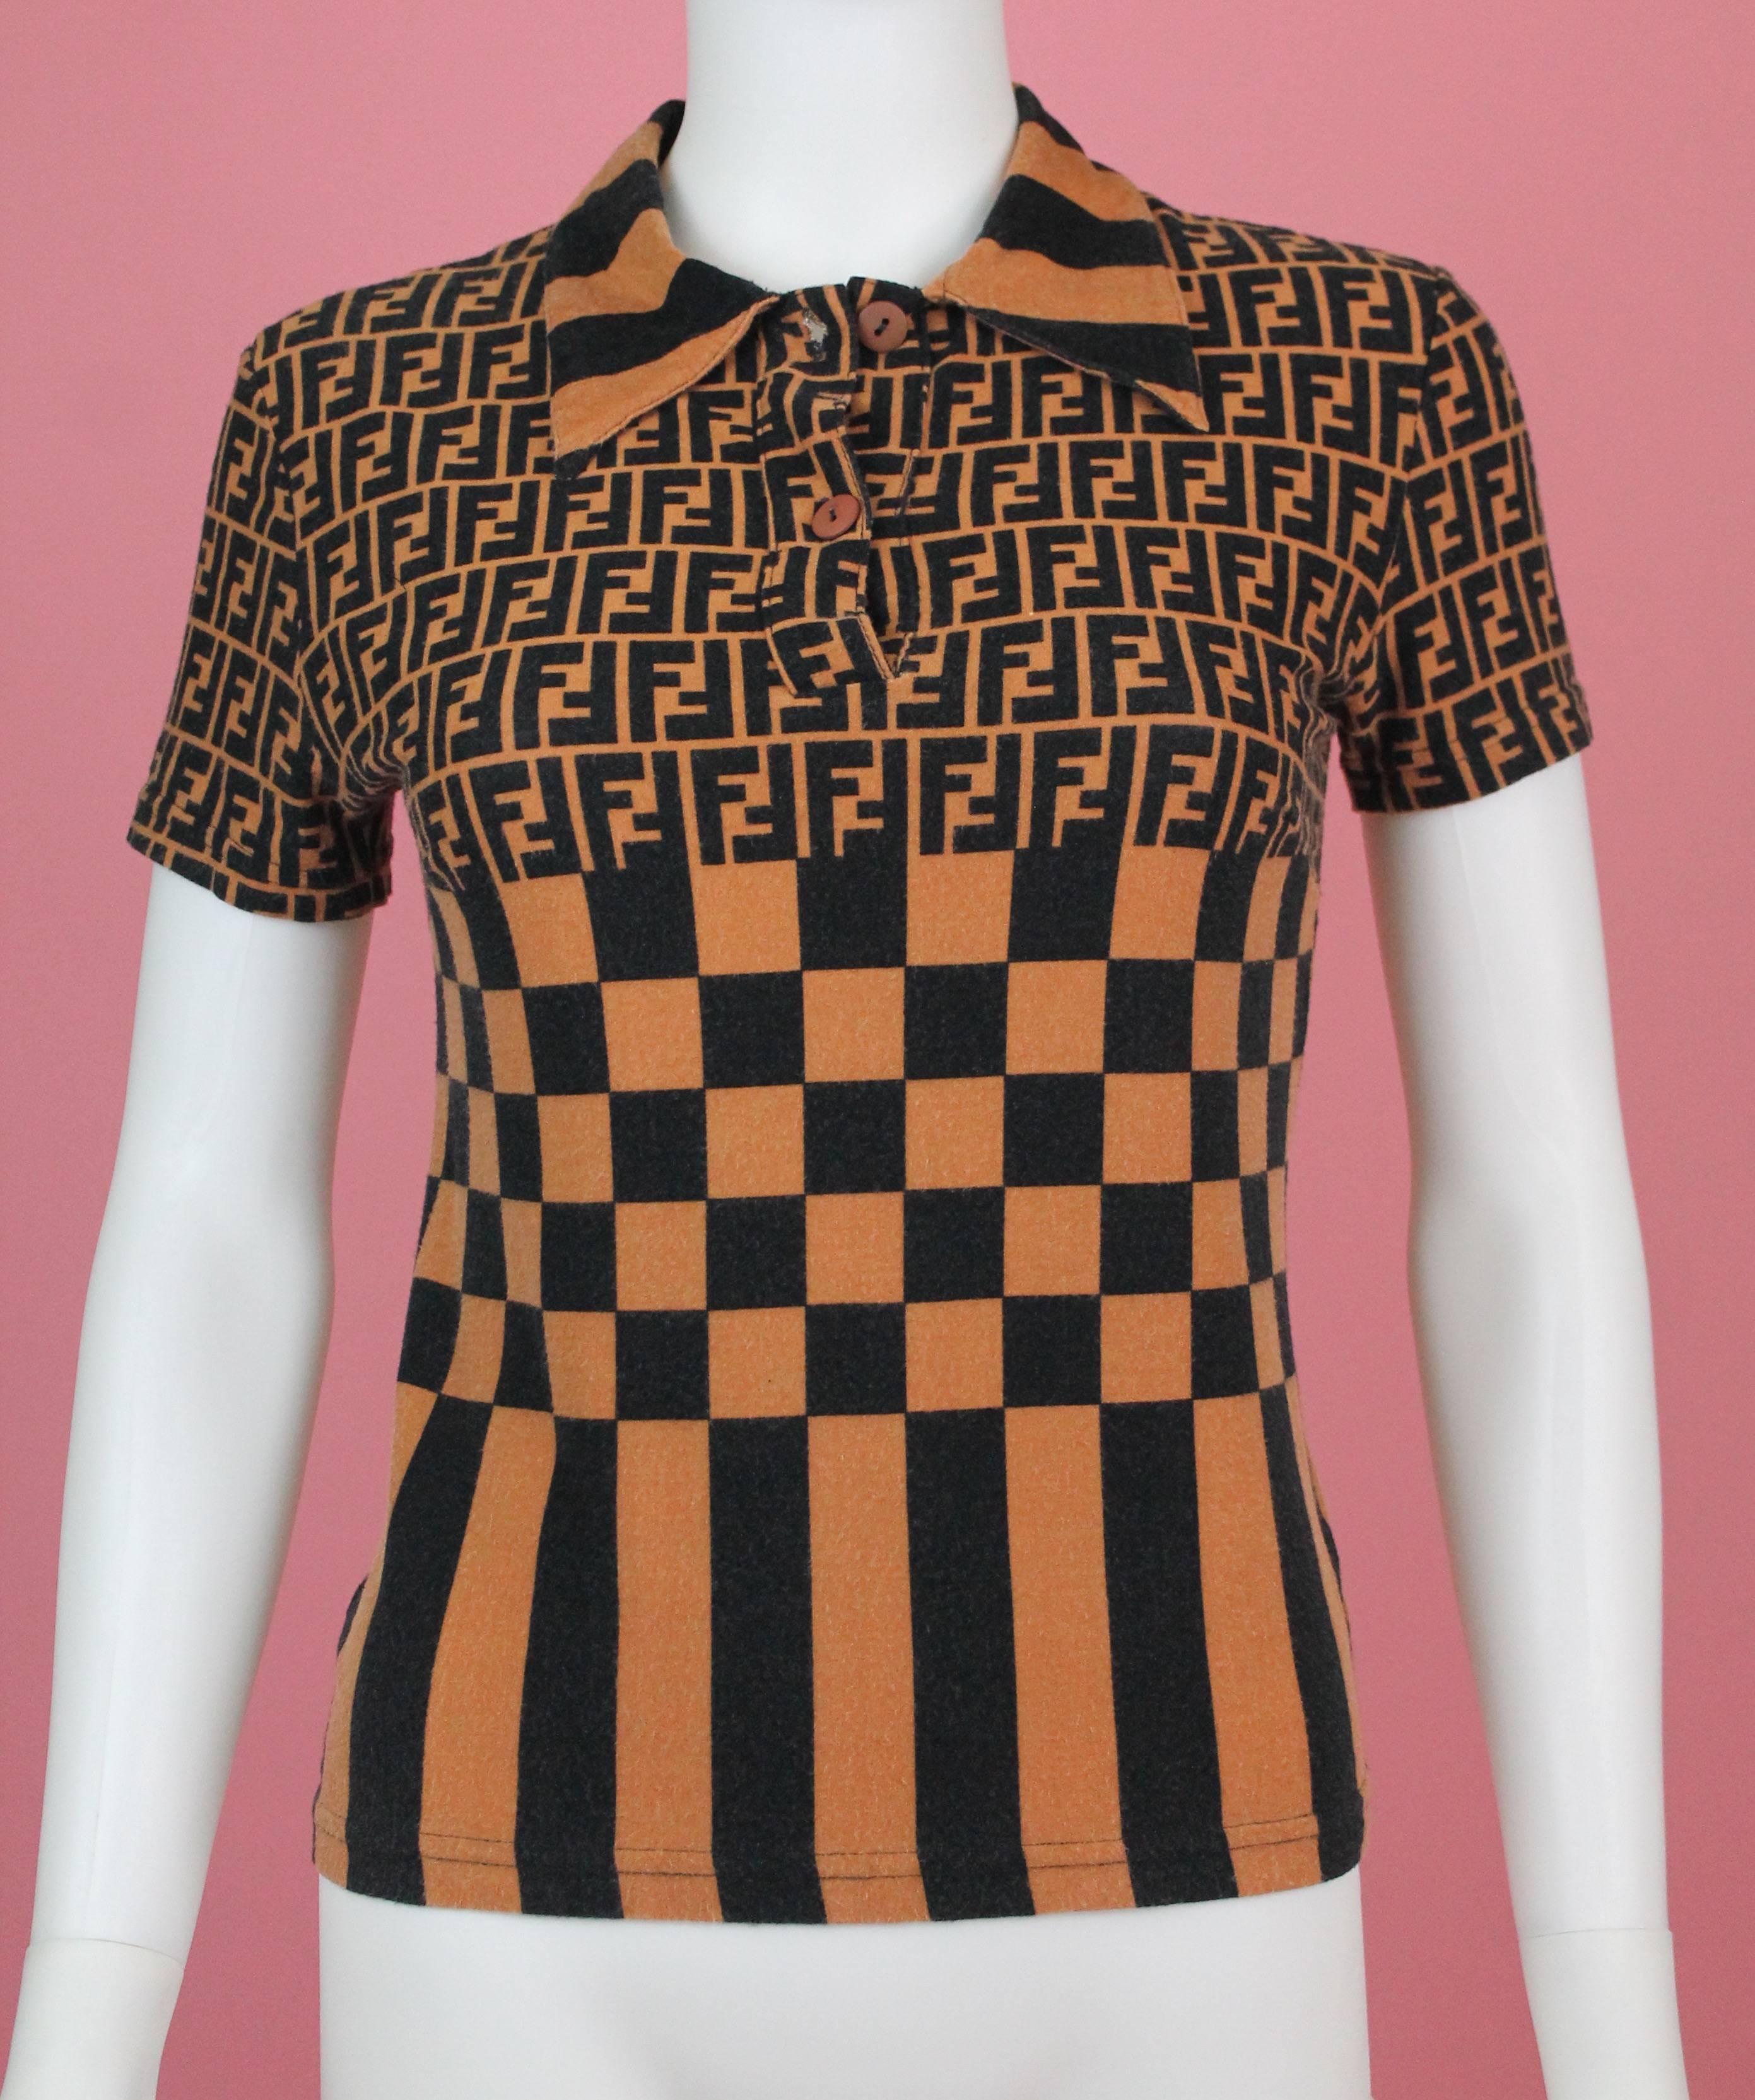 -Super soft and stretchy summer shirt from Fendi Mare
-Features iconic F monogram along with checker and striped print 
-Collared shirt with 2 buttons
-Made in Italy
-Sized 44 Italian / US 8 
-Great unisex piece, would fit a guy like a muscle